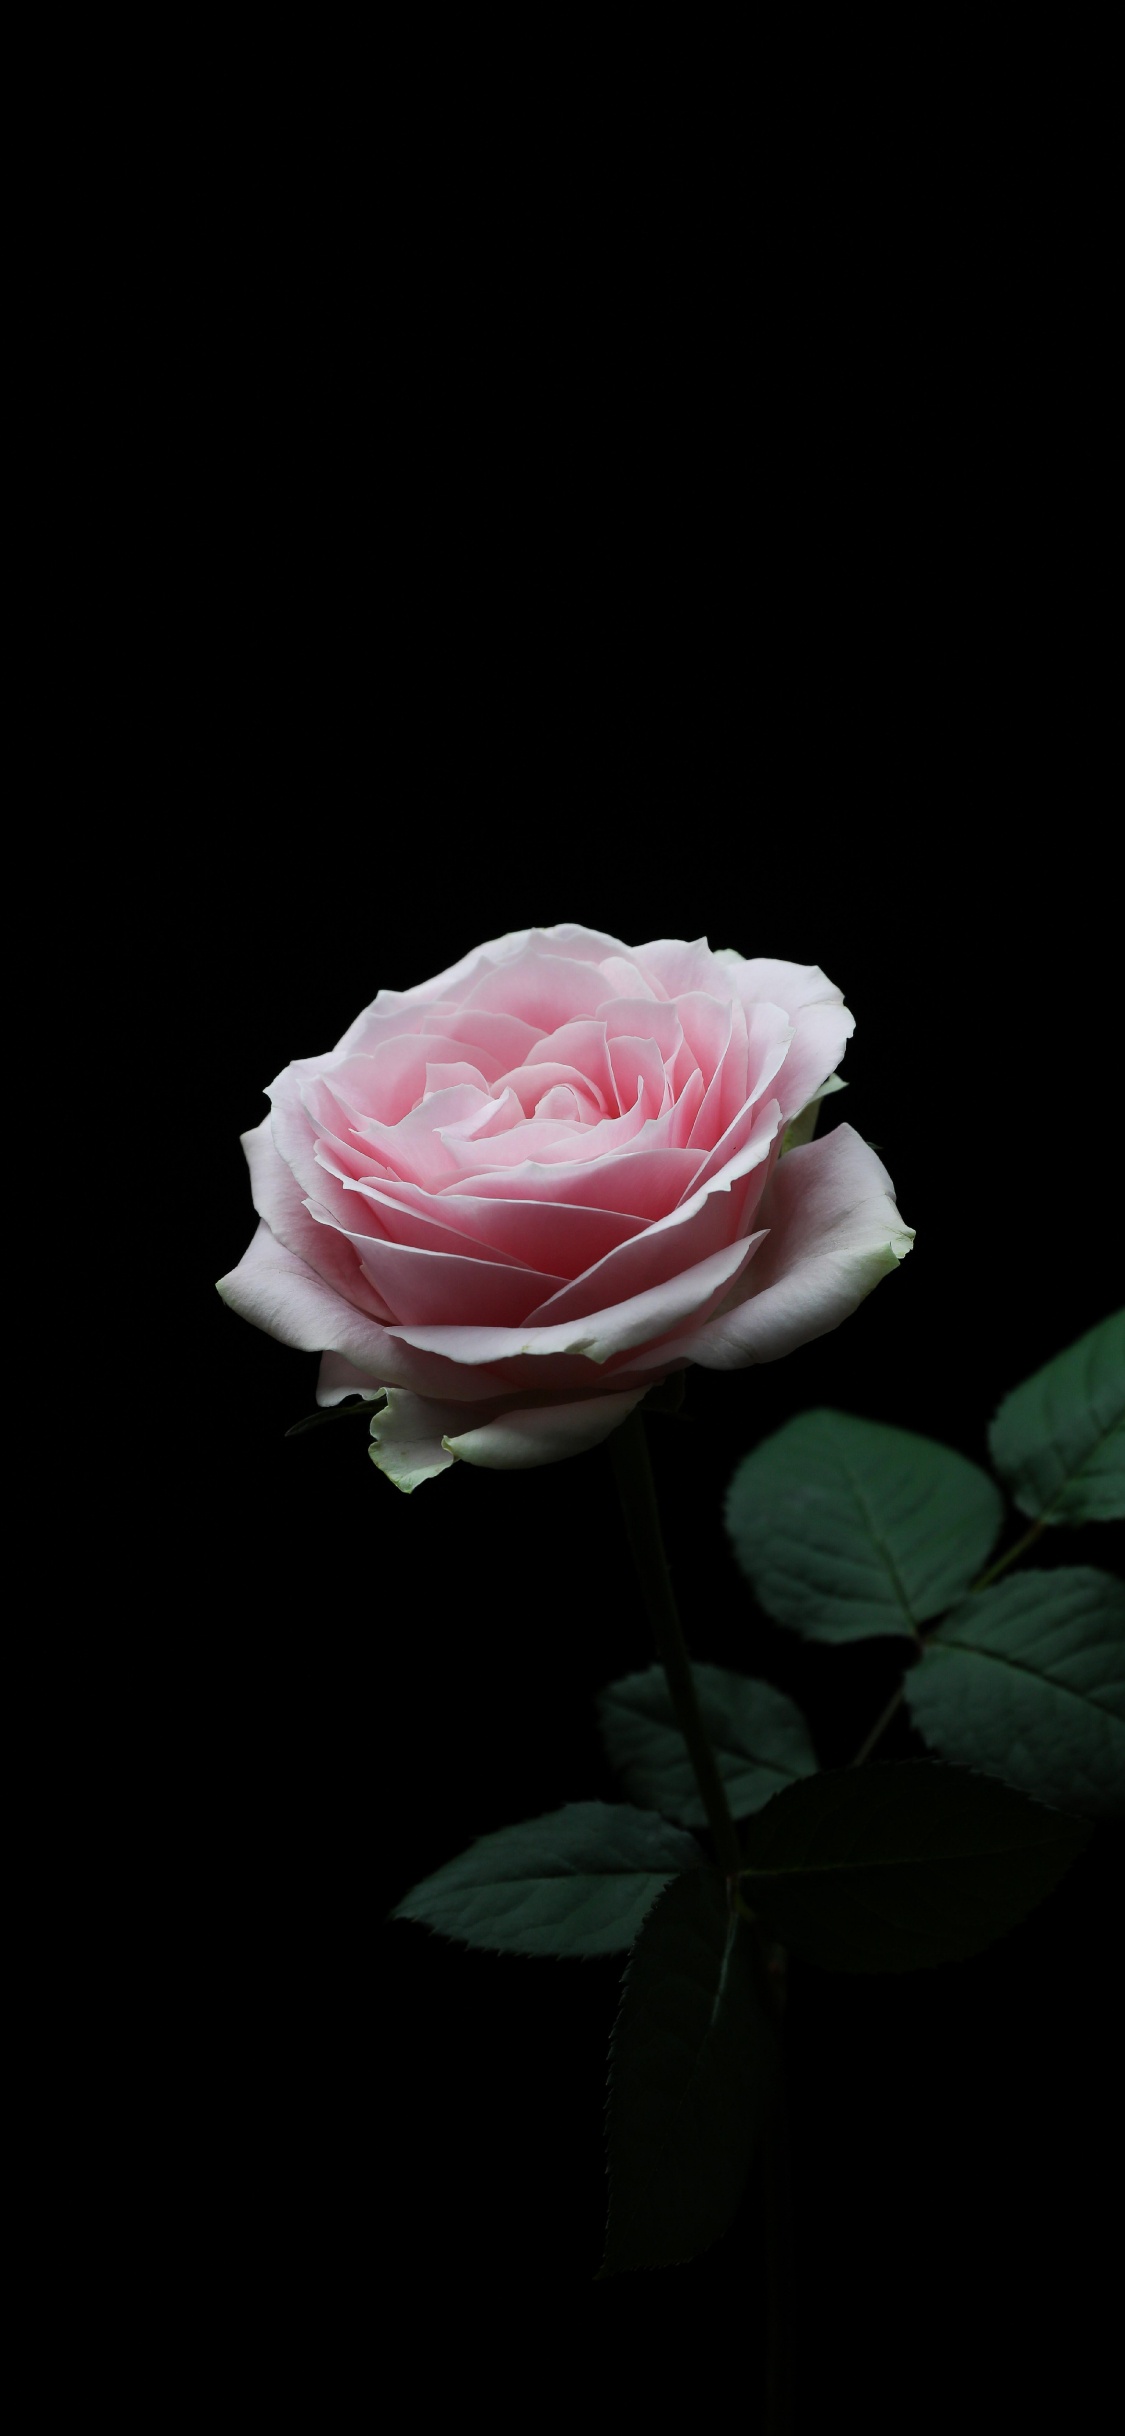 Pink Rose in Bloom With Black Background. Wallpaper in 1125x2436 Resolution